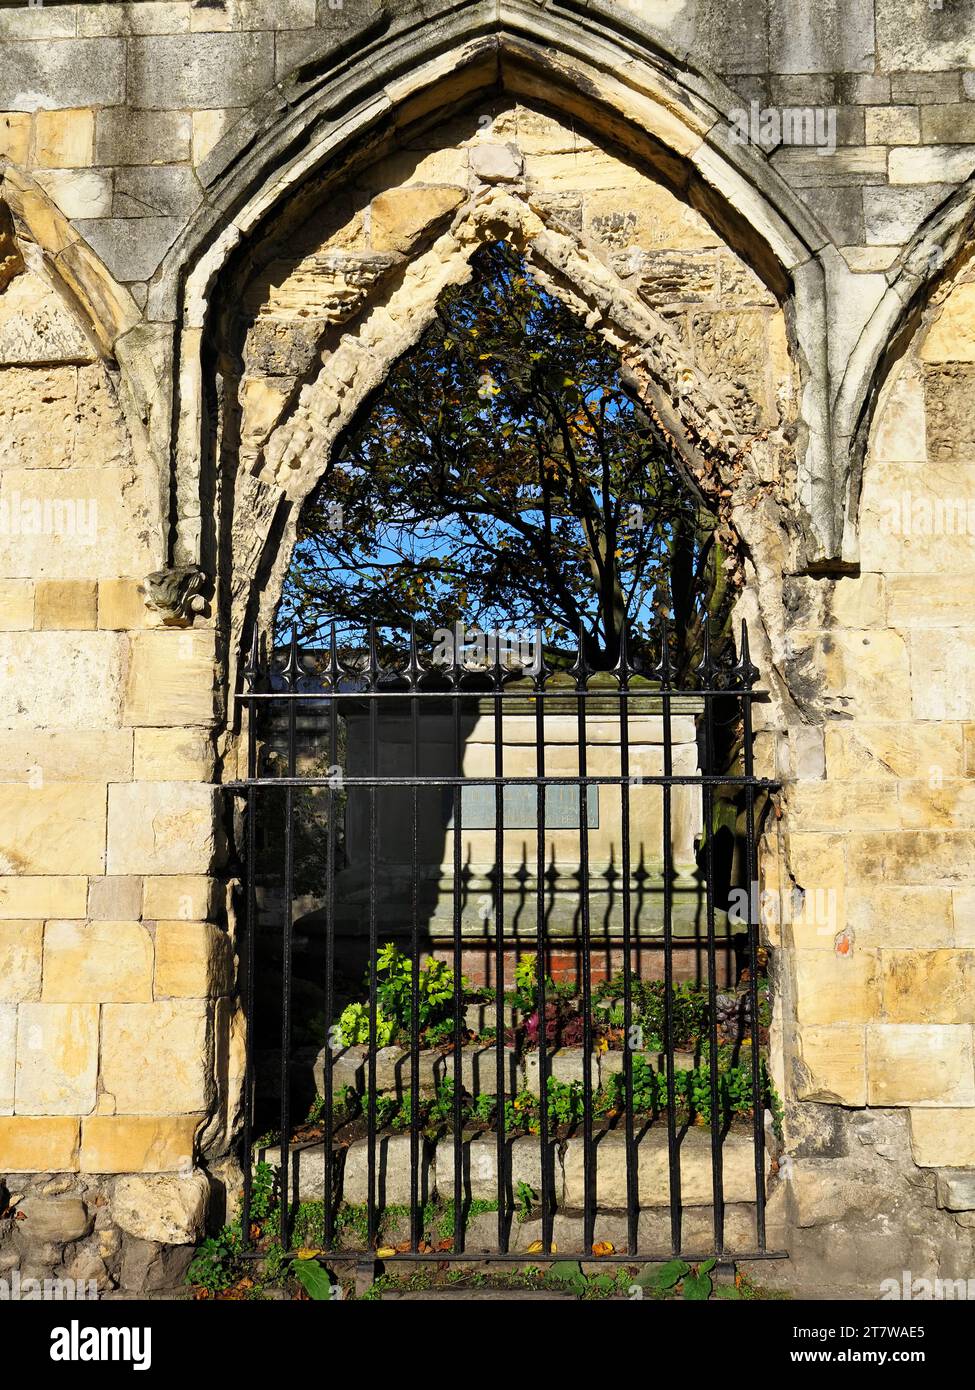 William Ettys Tomb viewed through a doorway in the ruins of St Marys Abbey in Museum Gardens City of York Yorkshire England Stock Photo